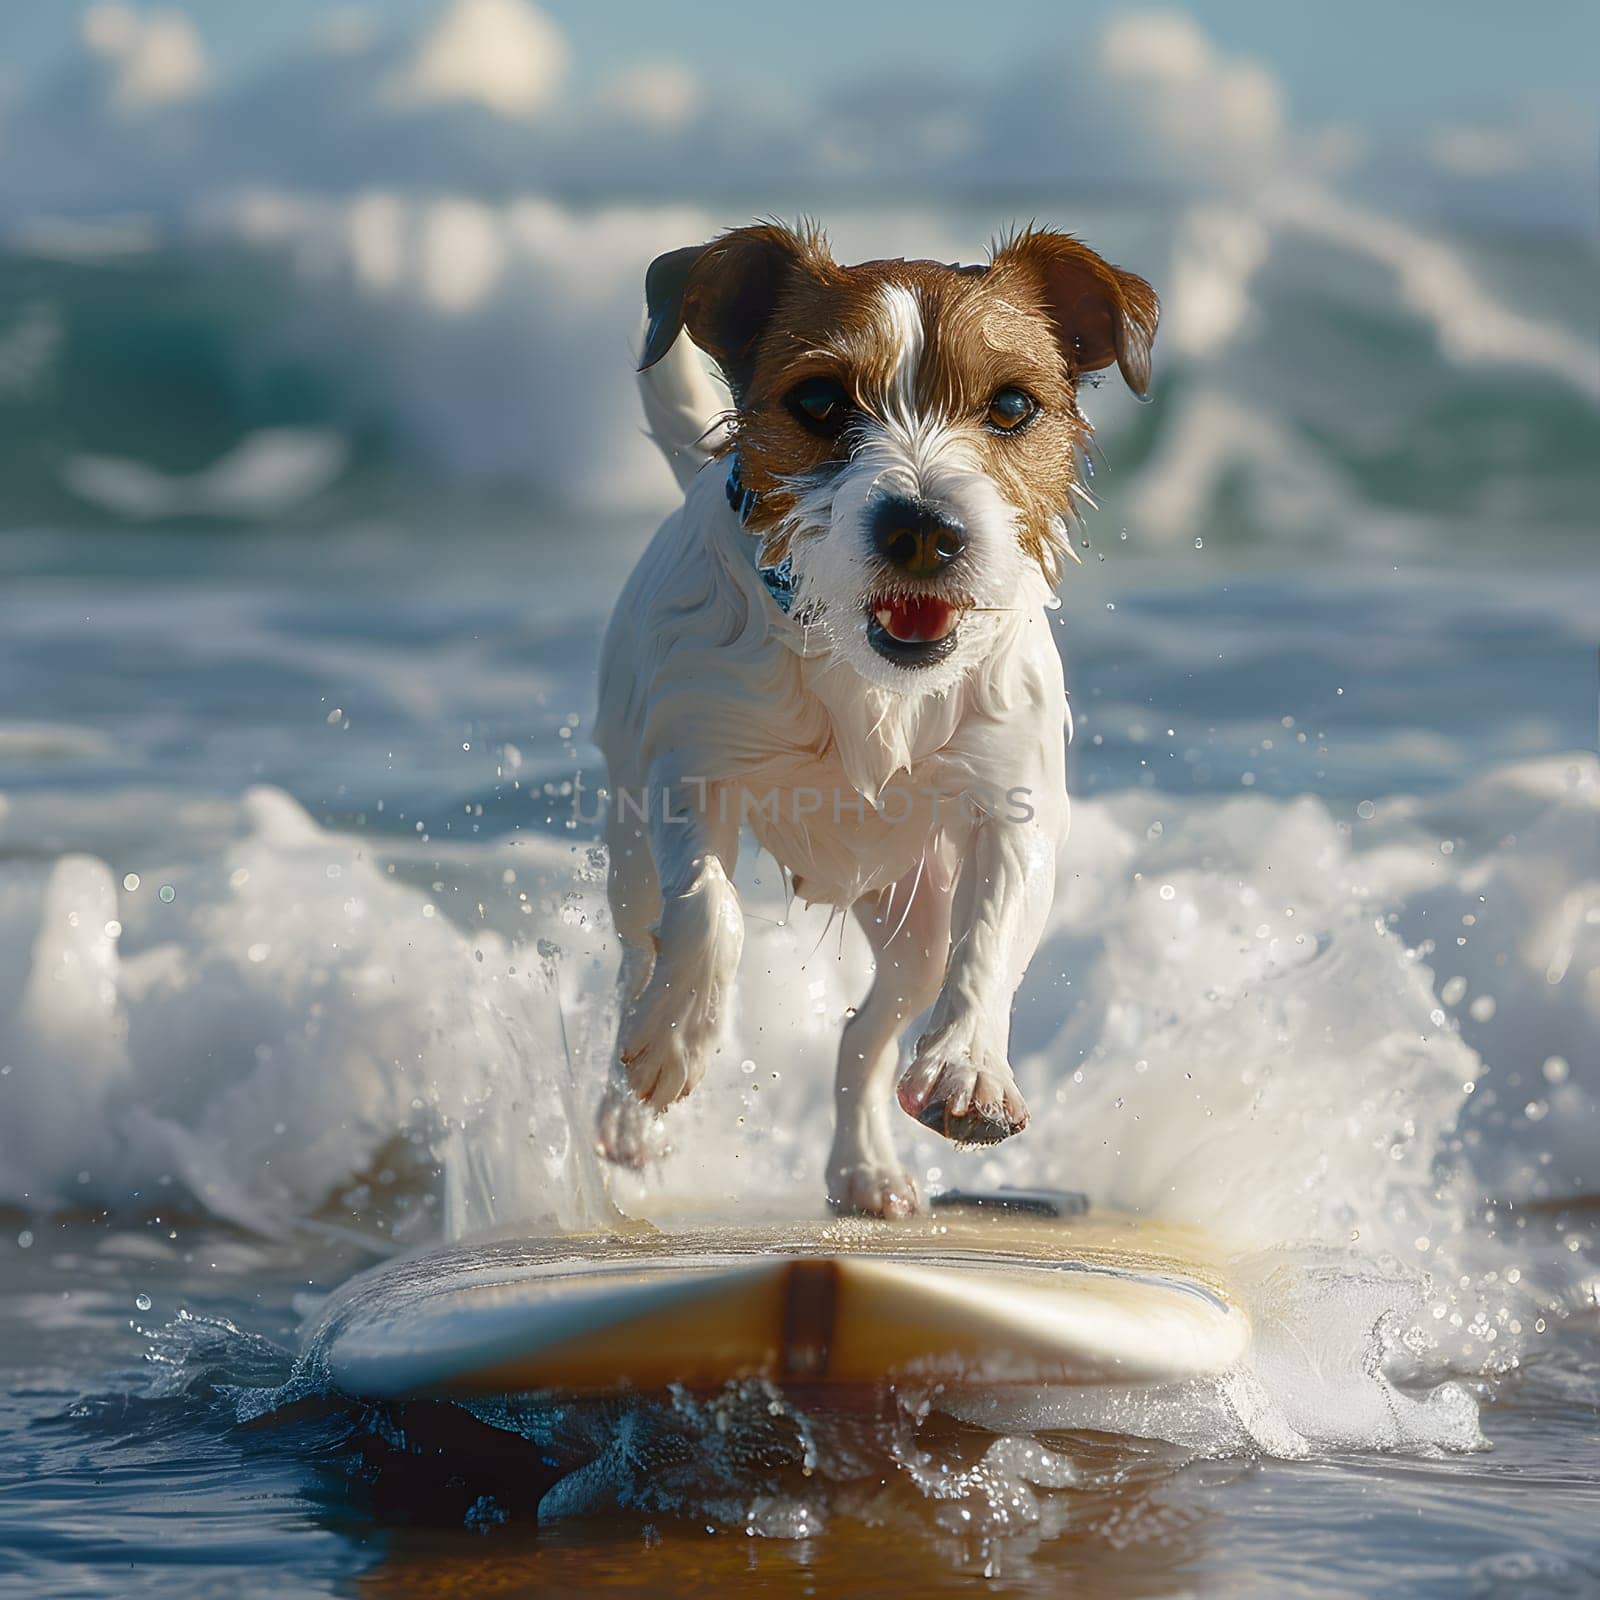 A Terrier dog rides a surfboard on the water waves by Nadtochiy